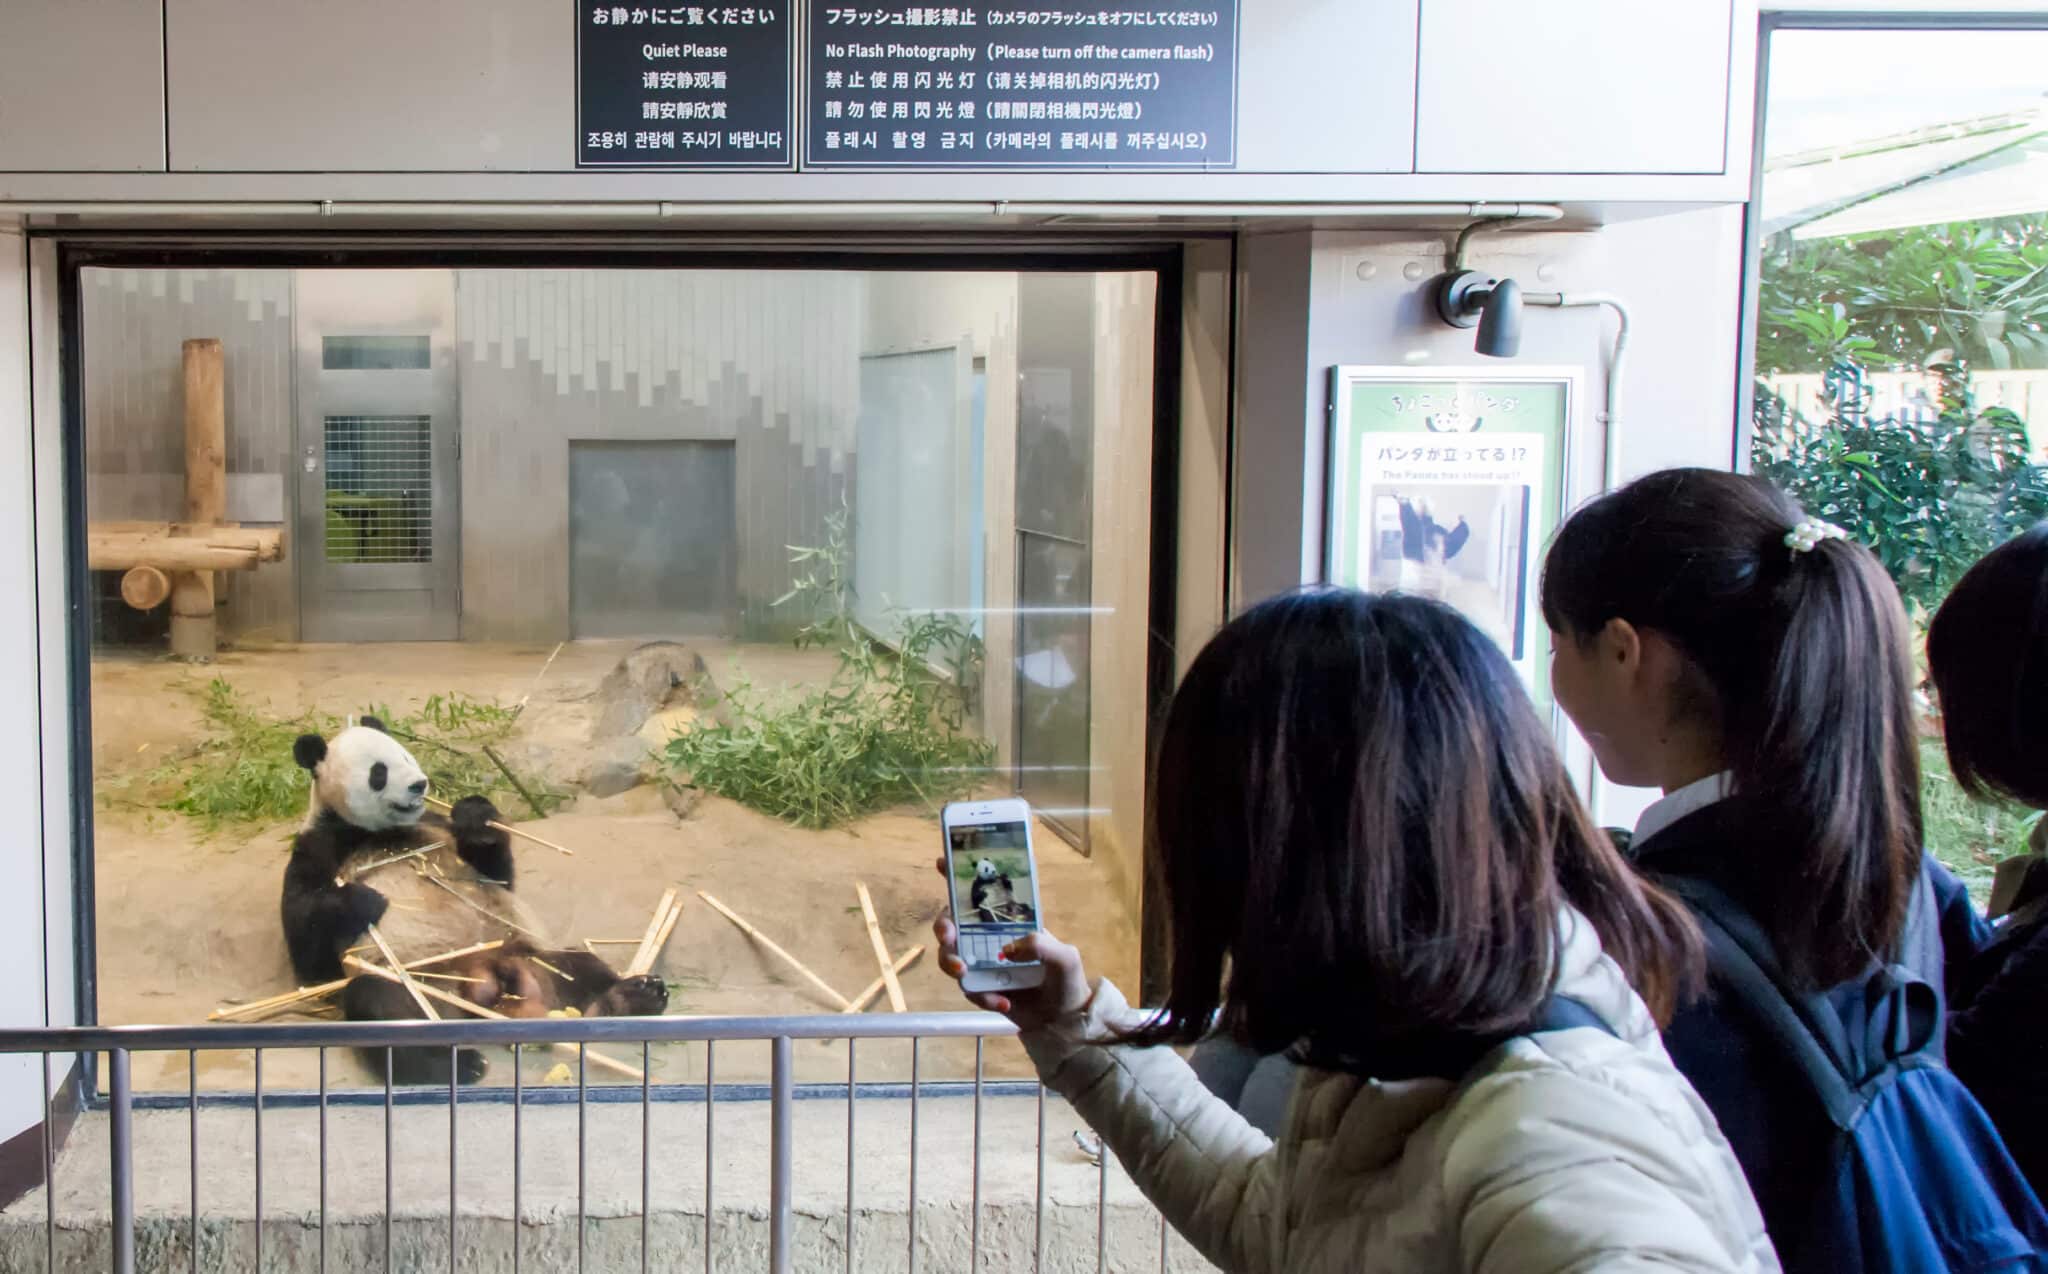 Ueno zoo in tokyo - panda eating bamboo while girls take photos with their cell phones